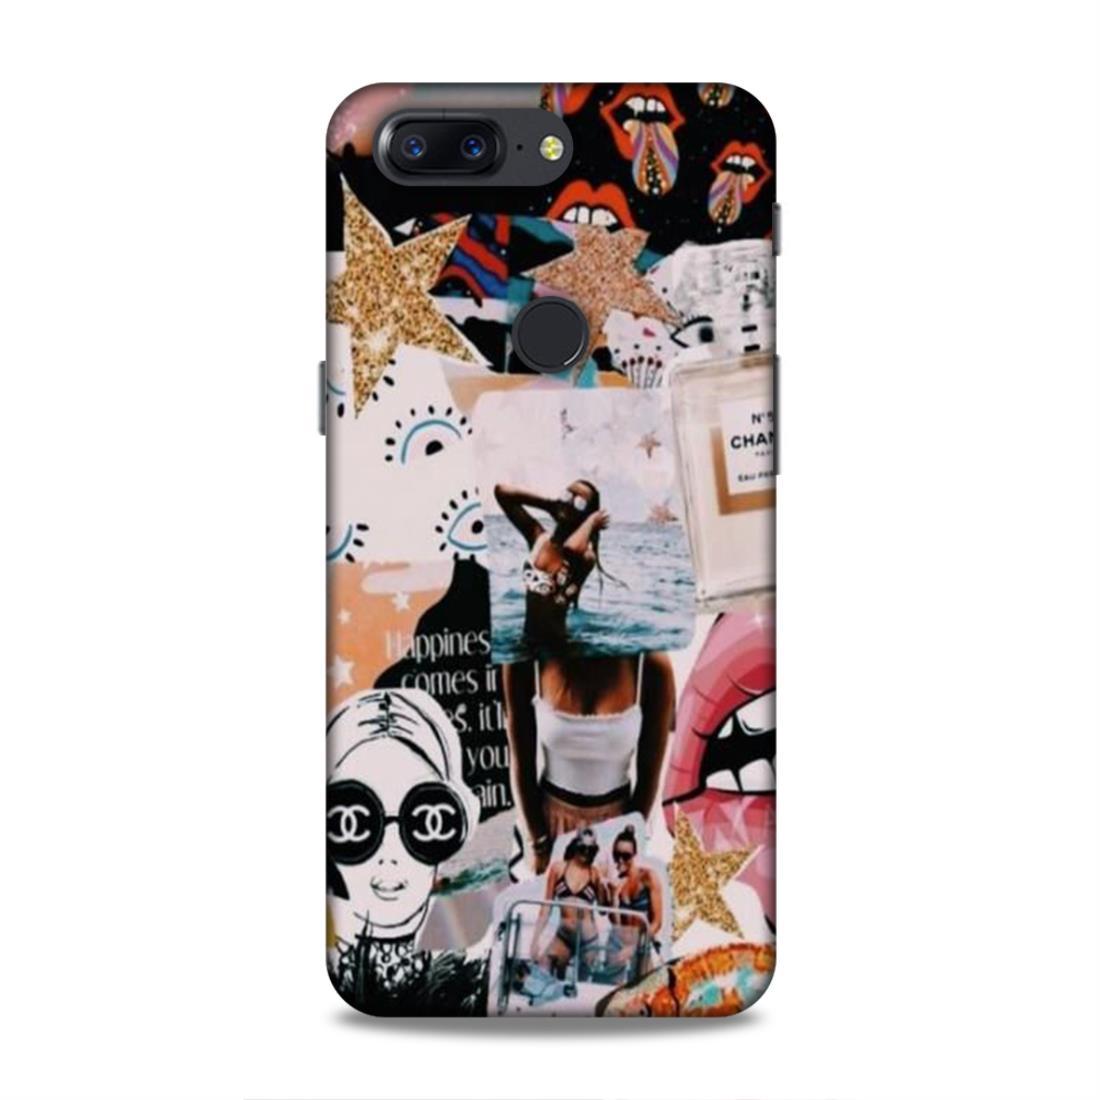 Happy Girl OnePlus 5T Mobile Case Cover